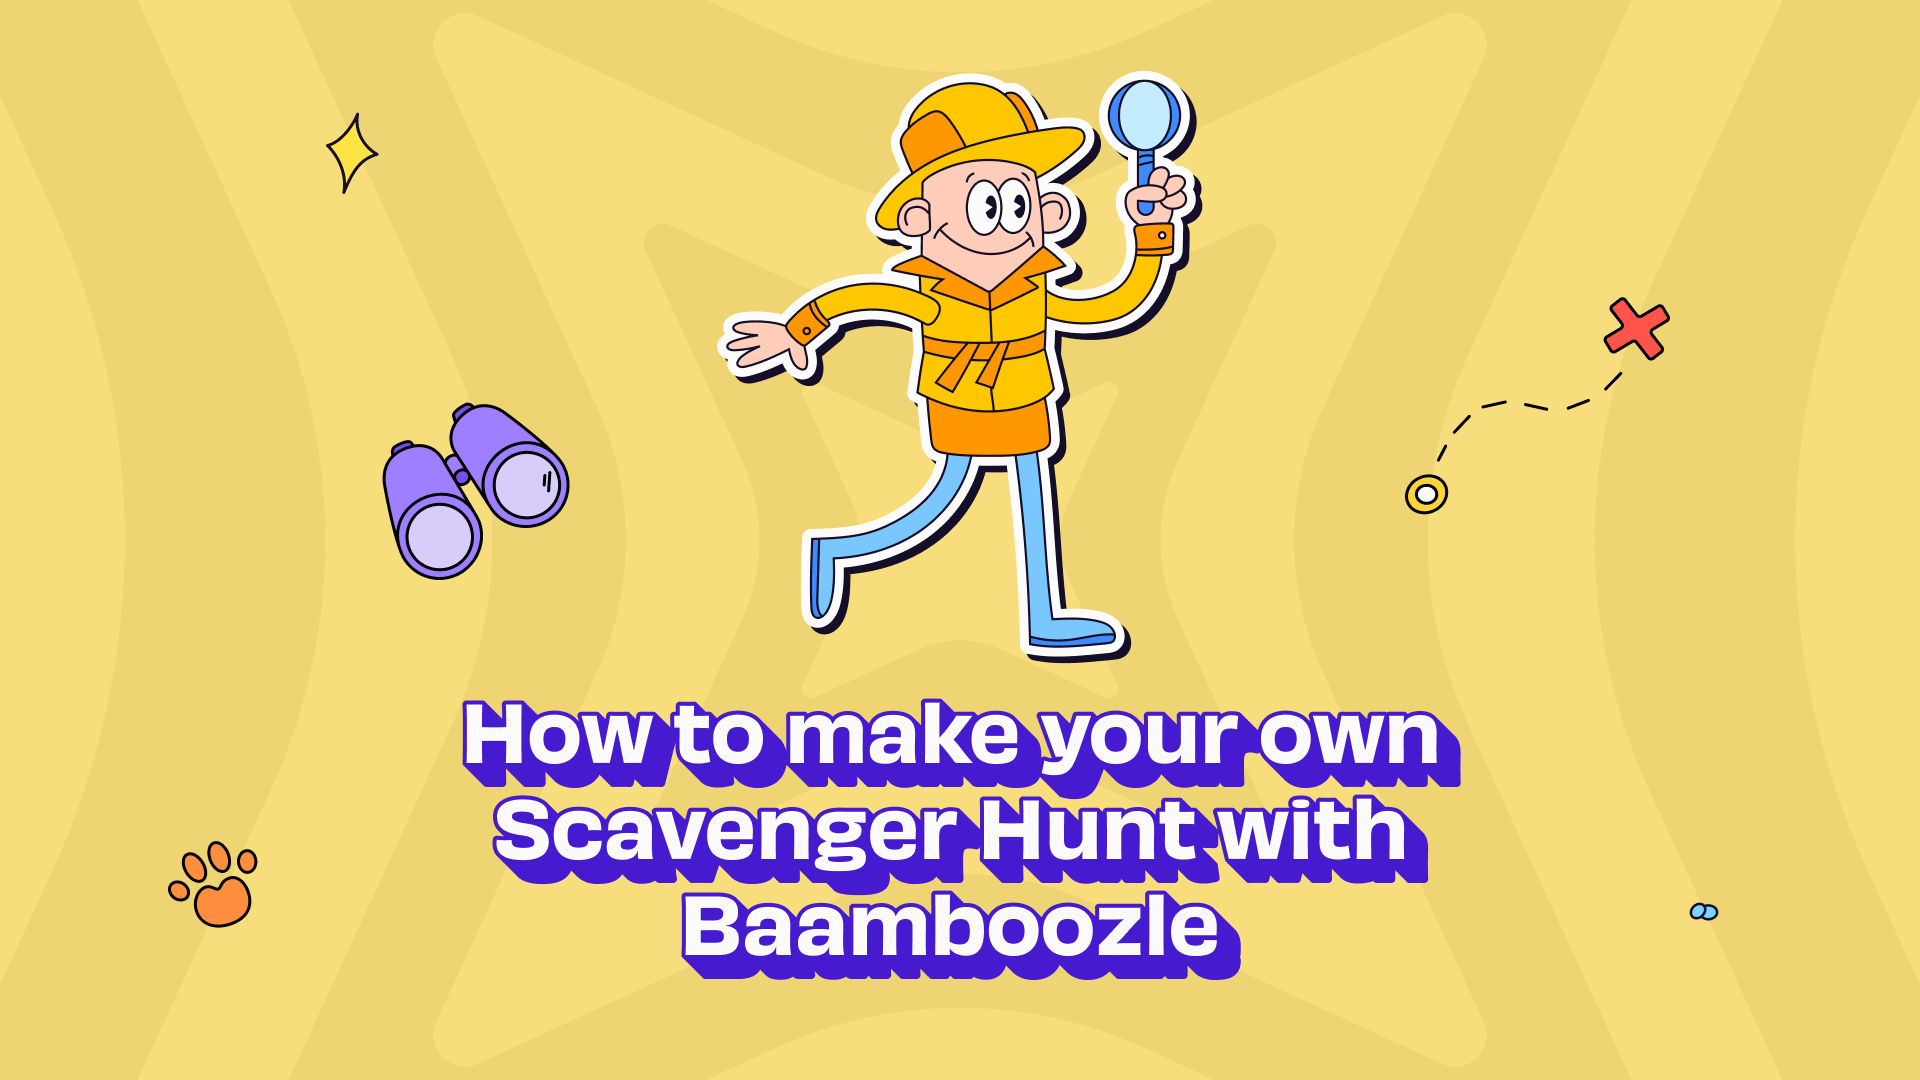 How to Make Your Own Scavenger Hunt with Baamboozle